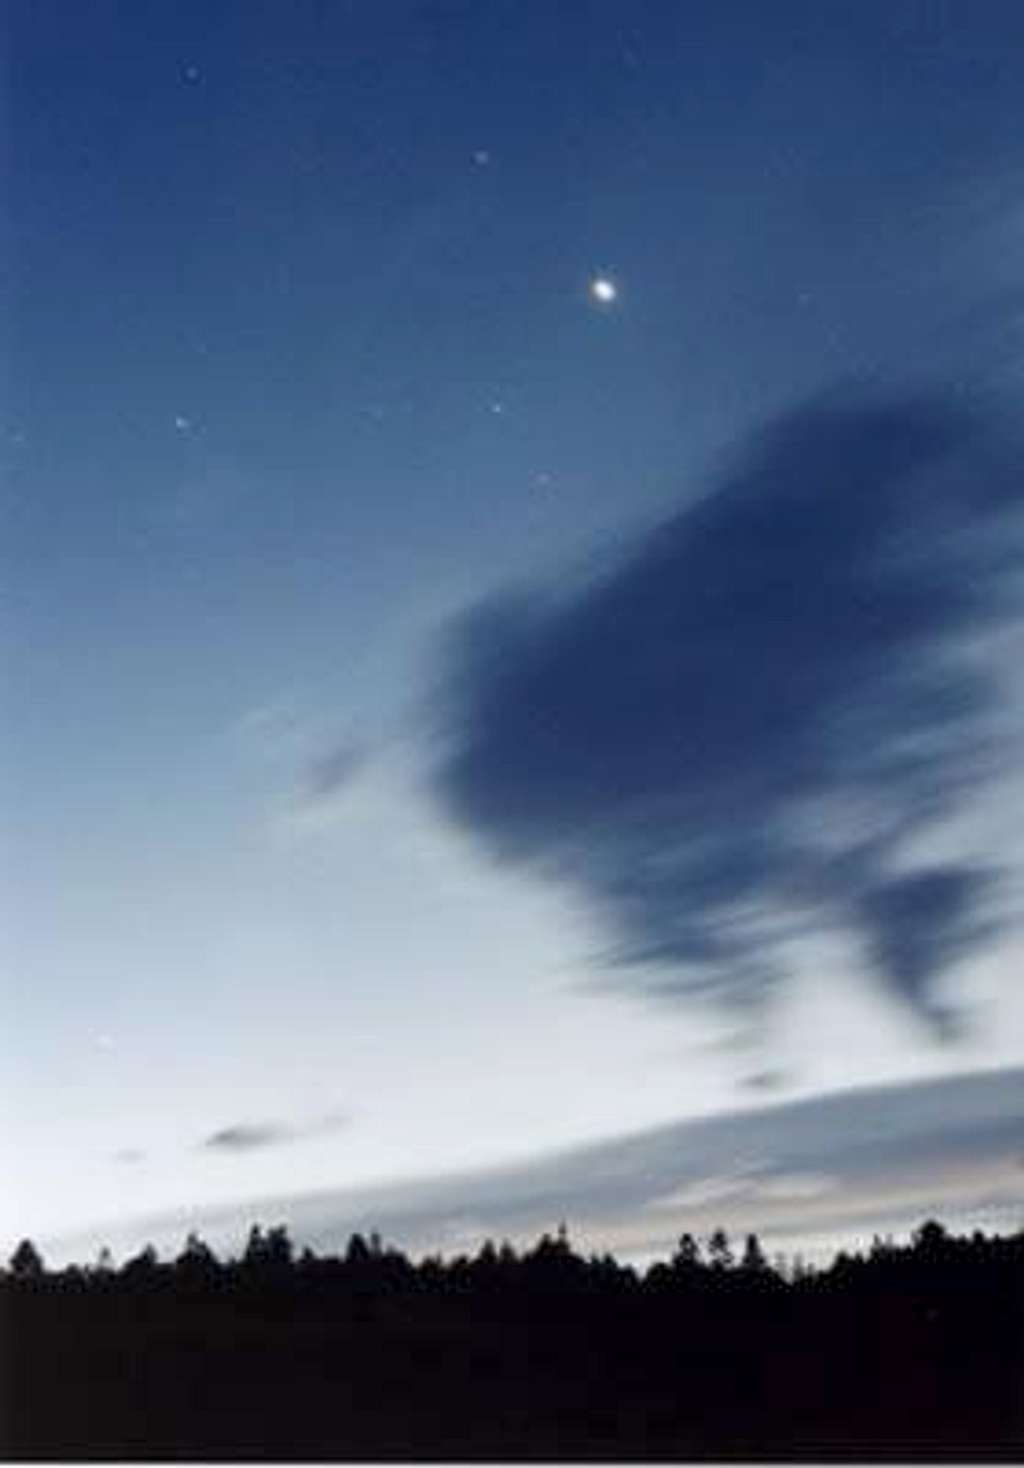 Venus and clouds above the forest